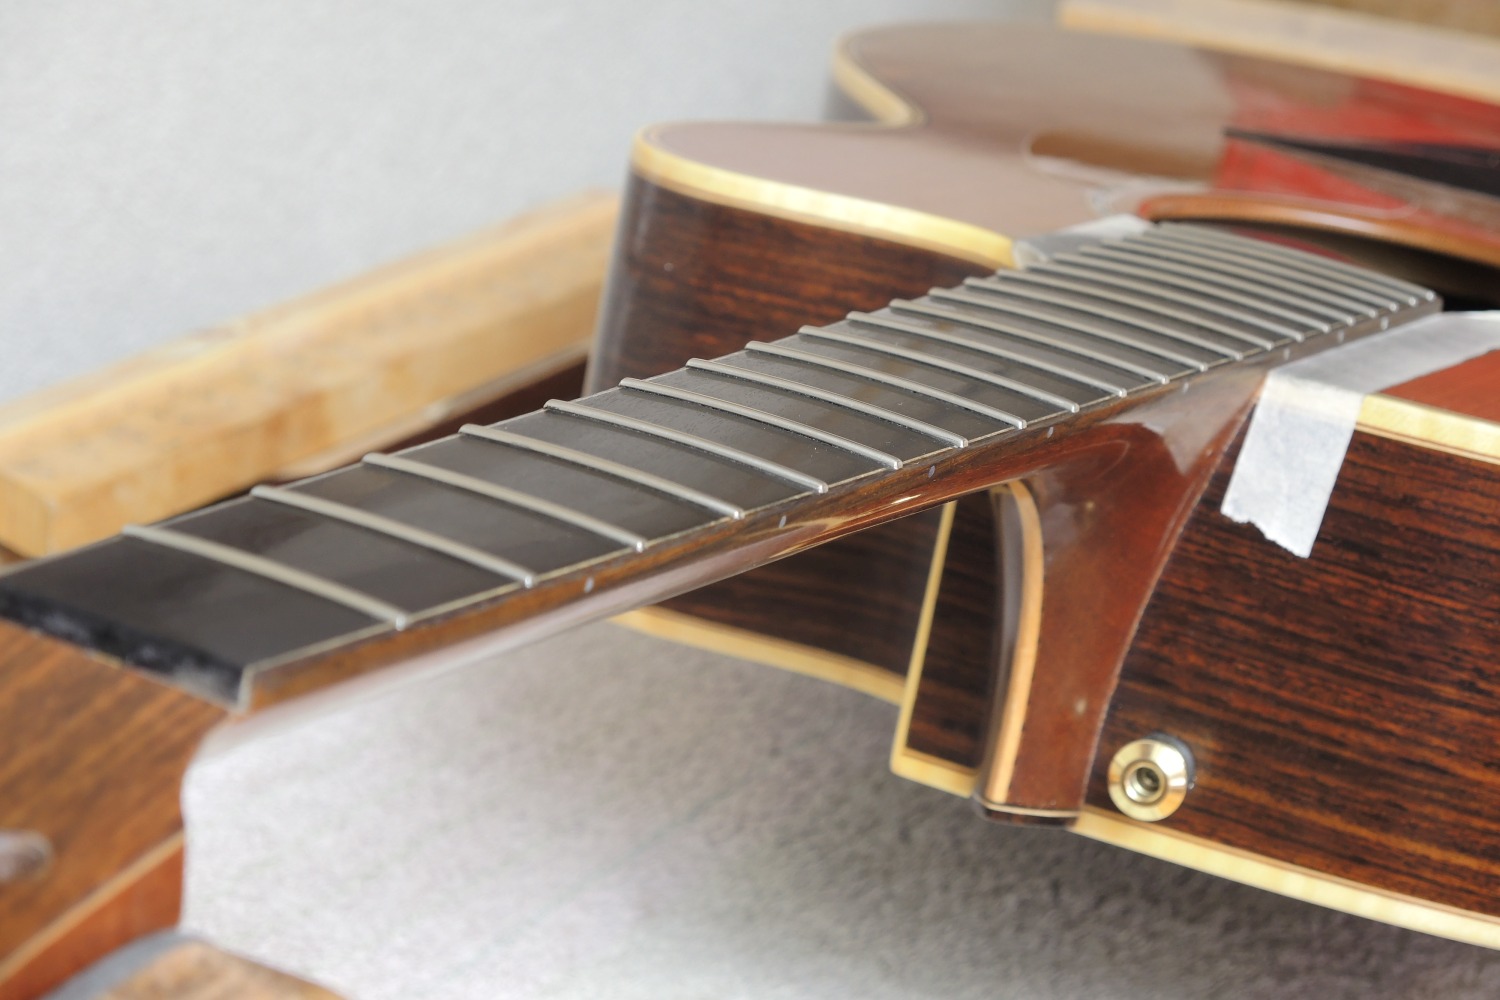 Re-fretting of an acoustic guitar - The finished fingerboard